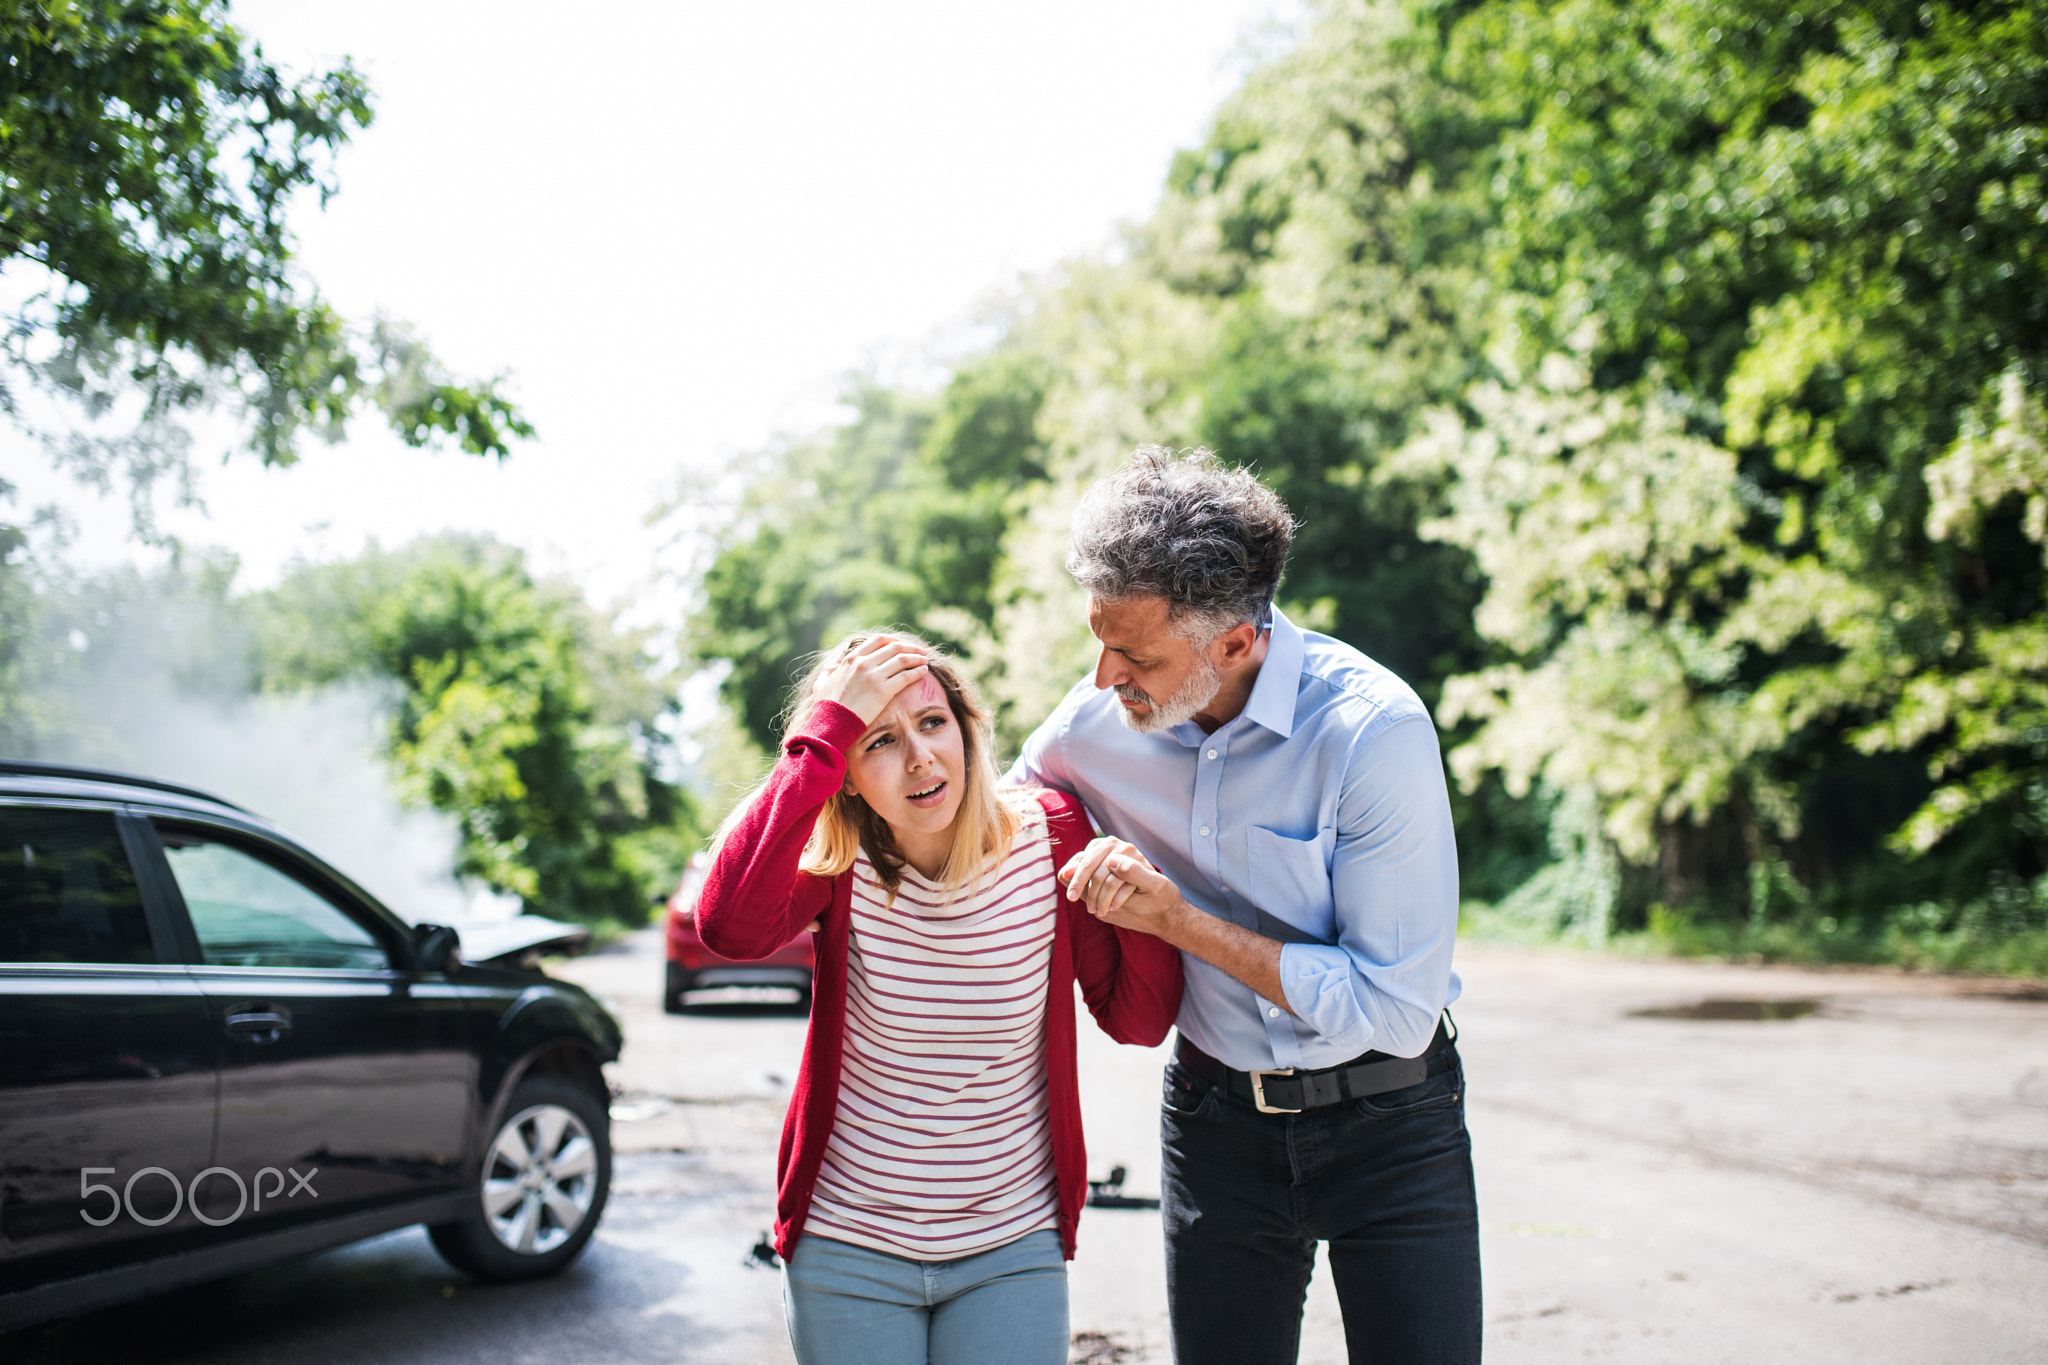 A mature man helping a young woman to walk after a car accident.